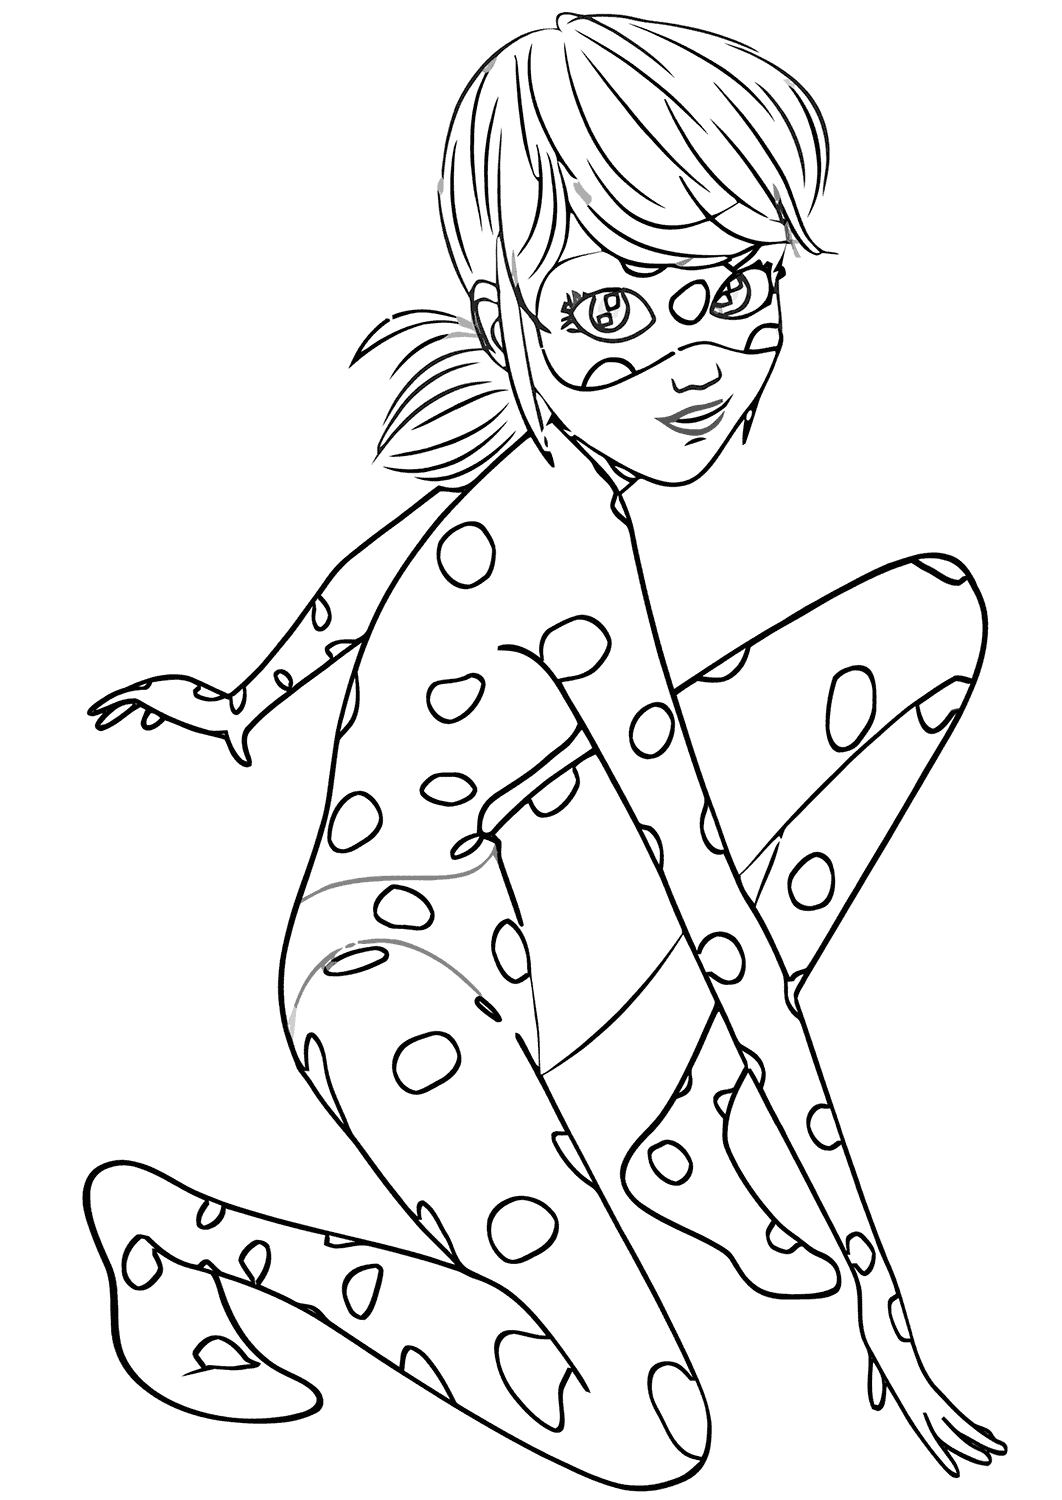 Marinette Coloring Pages to download and print for free